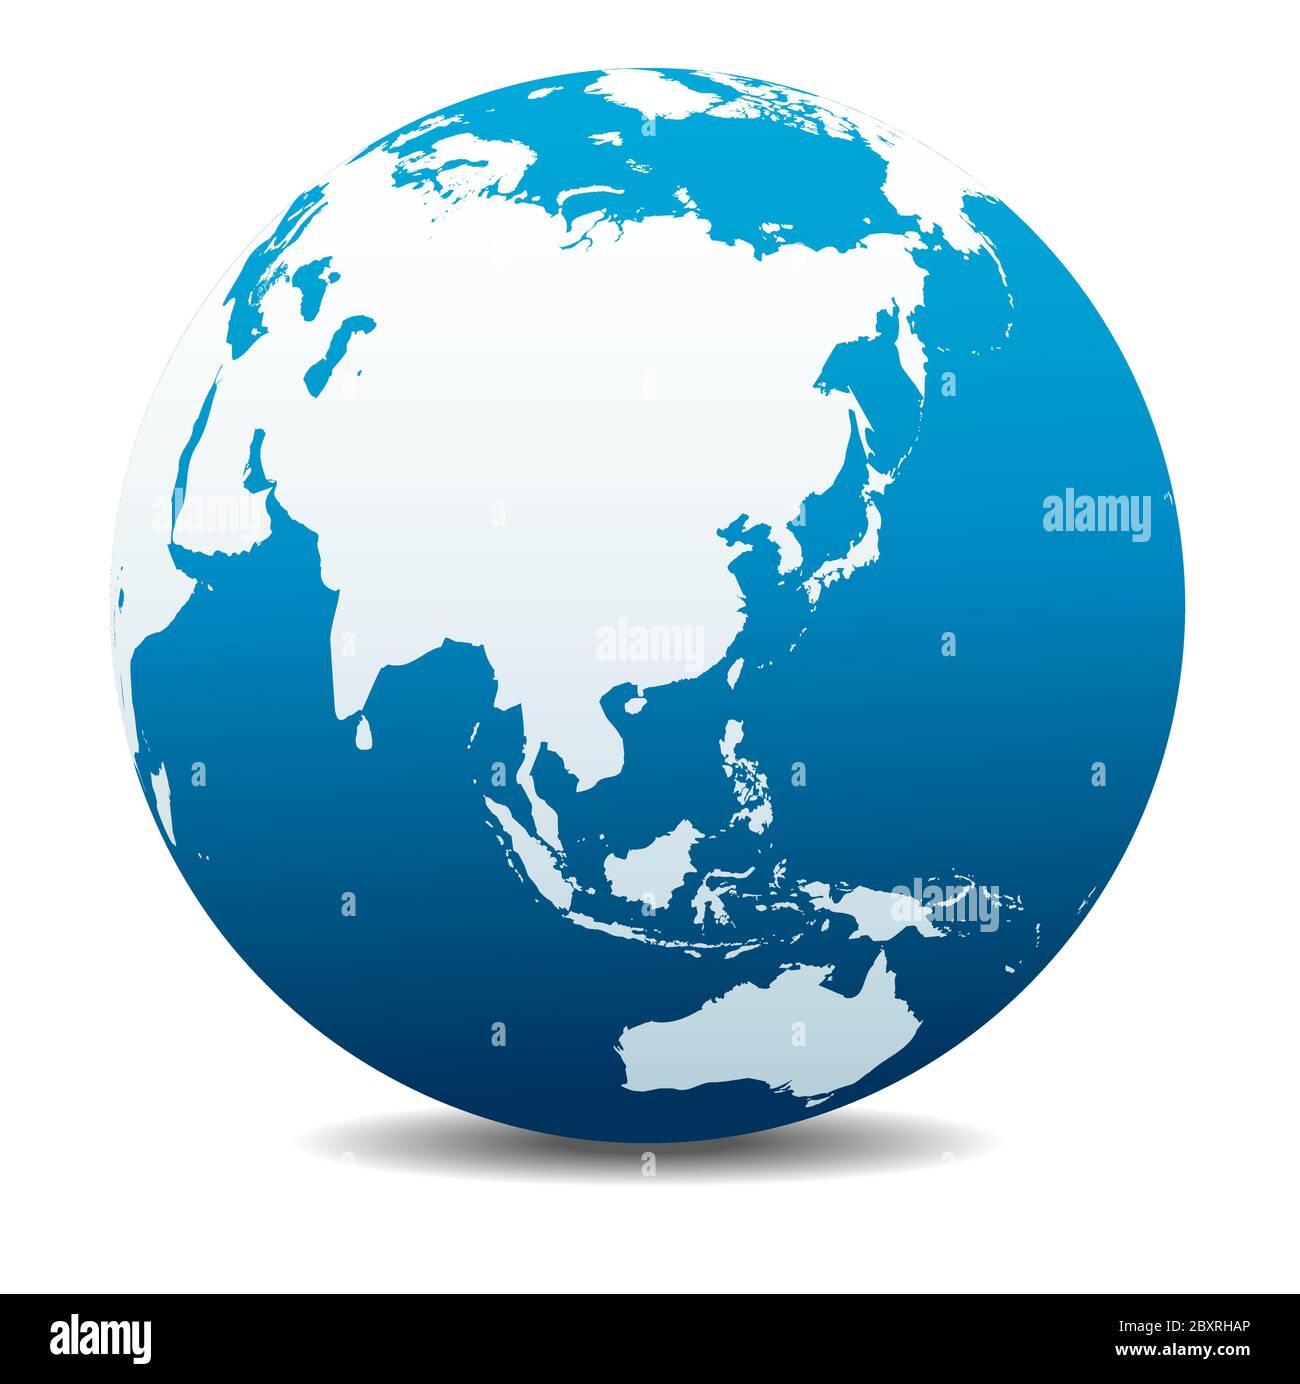 China, Japan, Malaysia, Thailand, Indonesia. Vector Map Icon of the World Globe, Earth. All elements are on individual layers in the vector file. Stock Vector